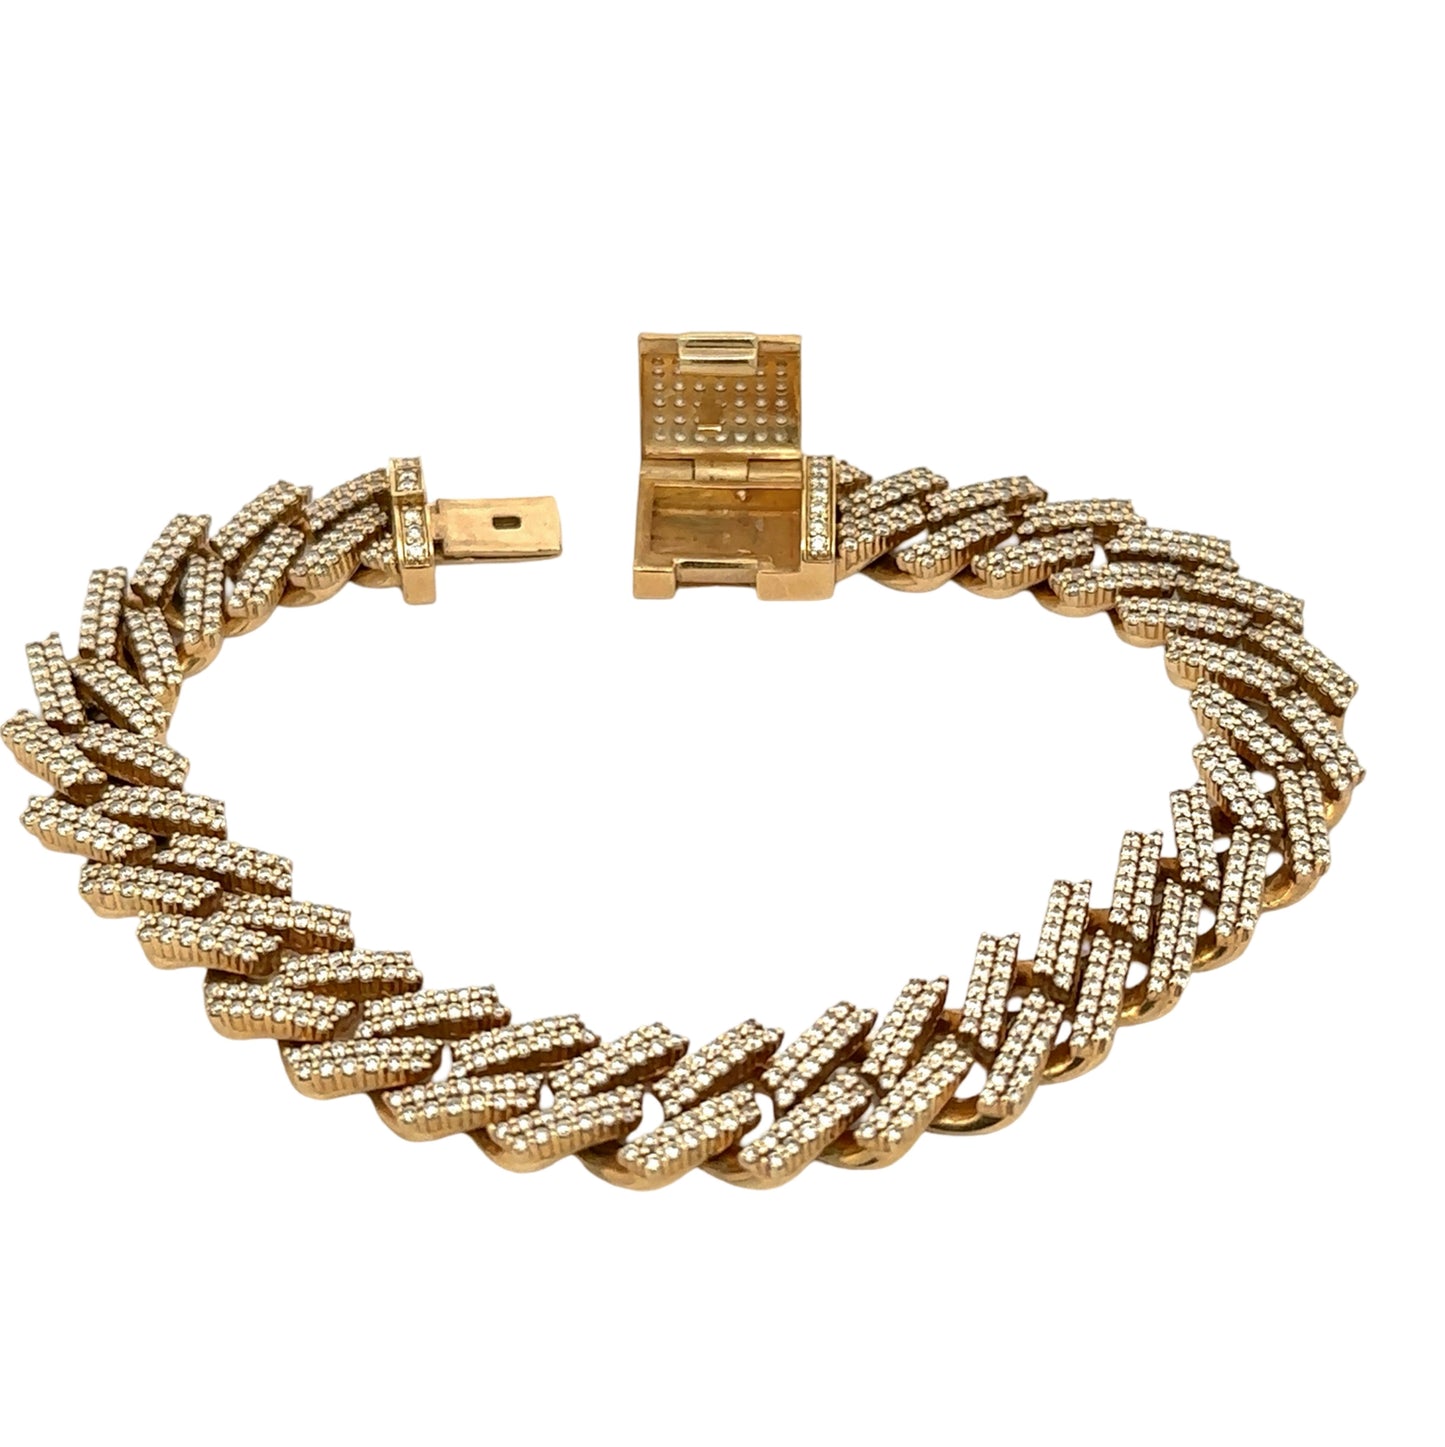 Front of bracelet with open clasp